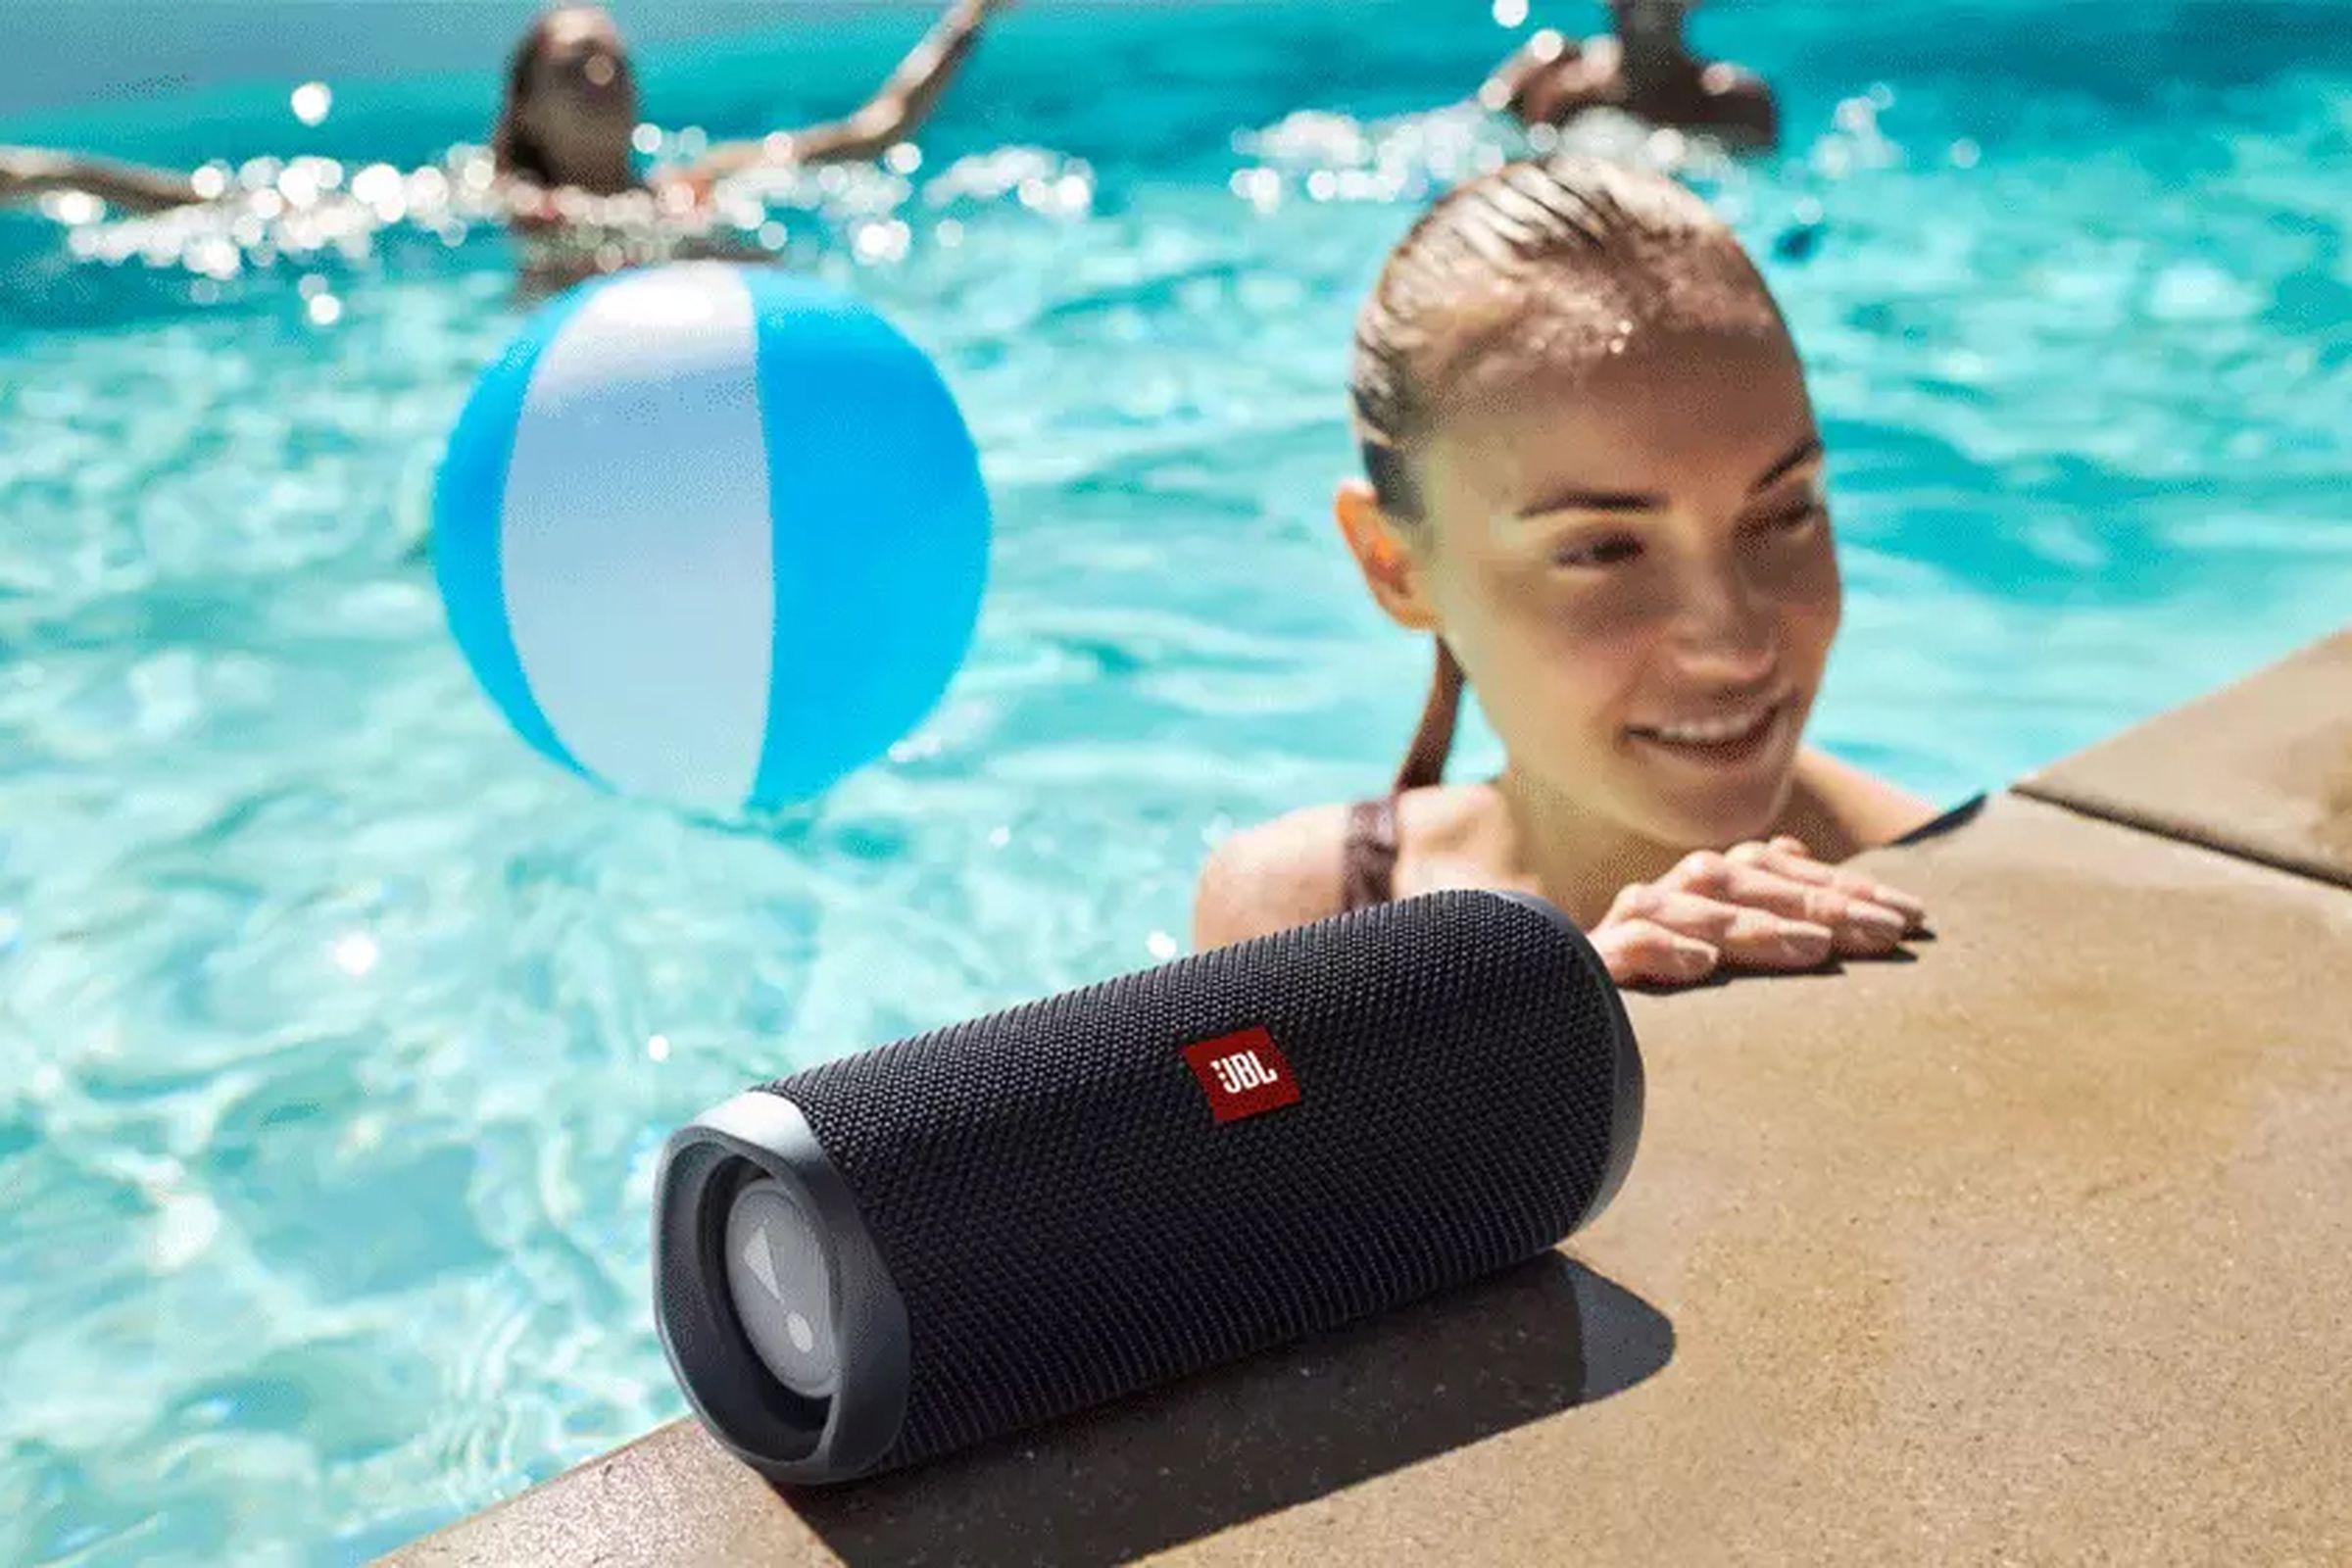 The waterproof speaker is small enough to throw in a beach bag.